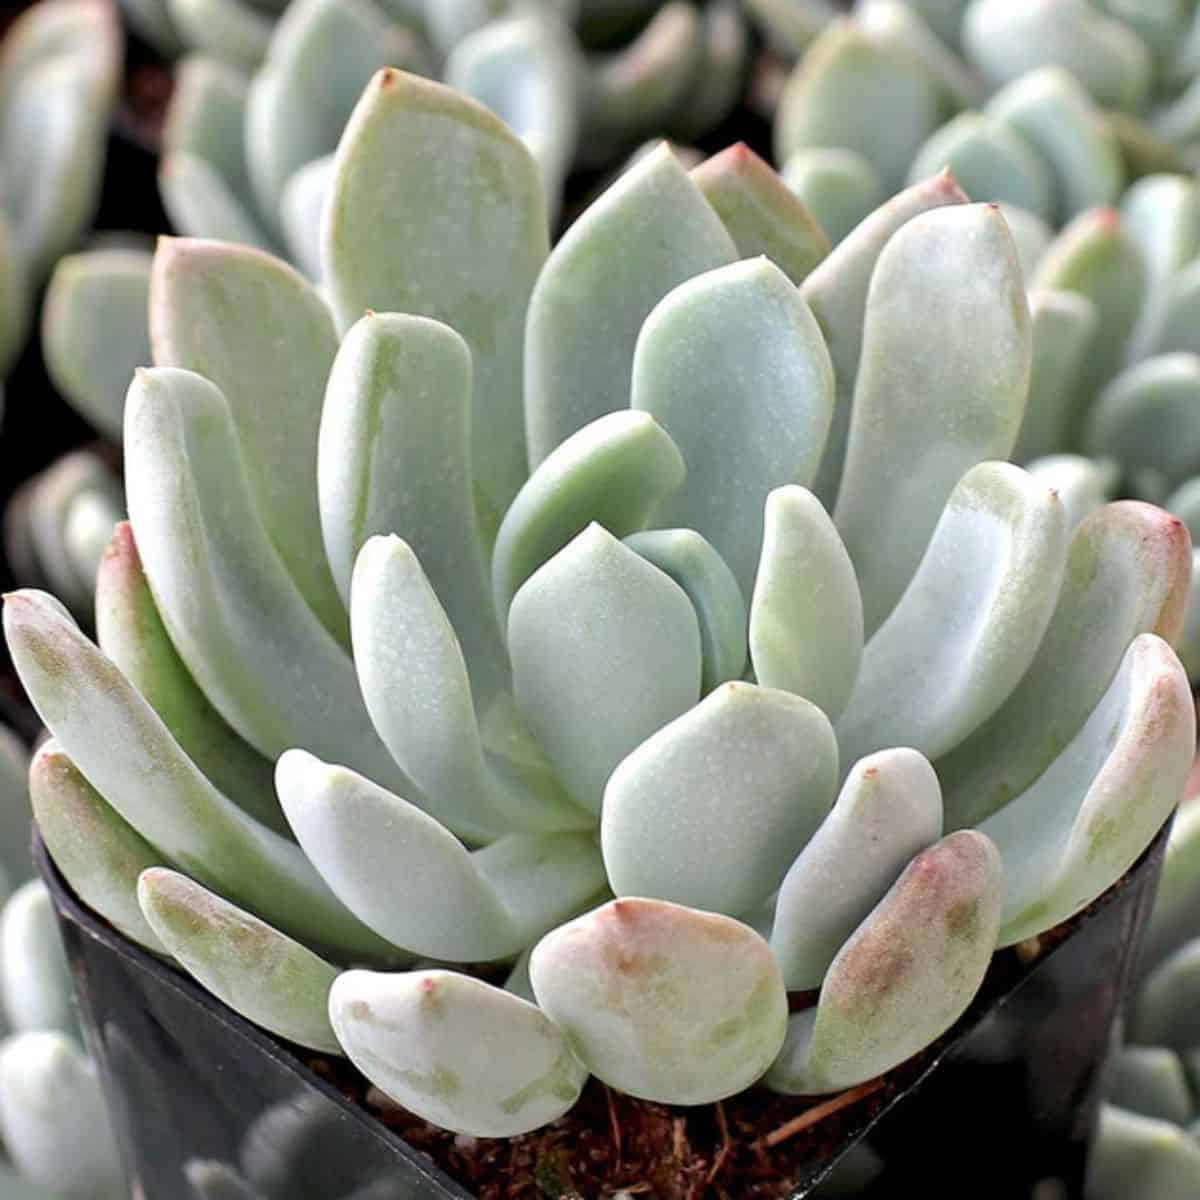 xPachyveria clavifolia - Jeweled Crown in a pot.